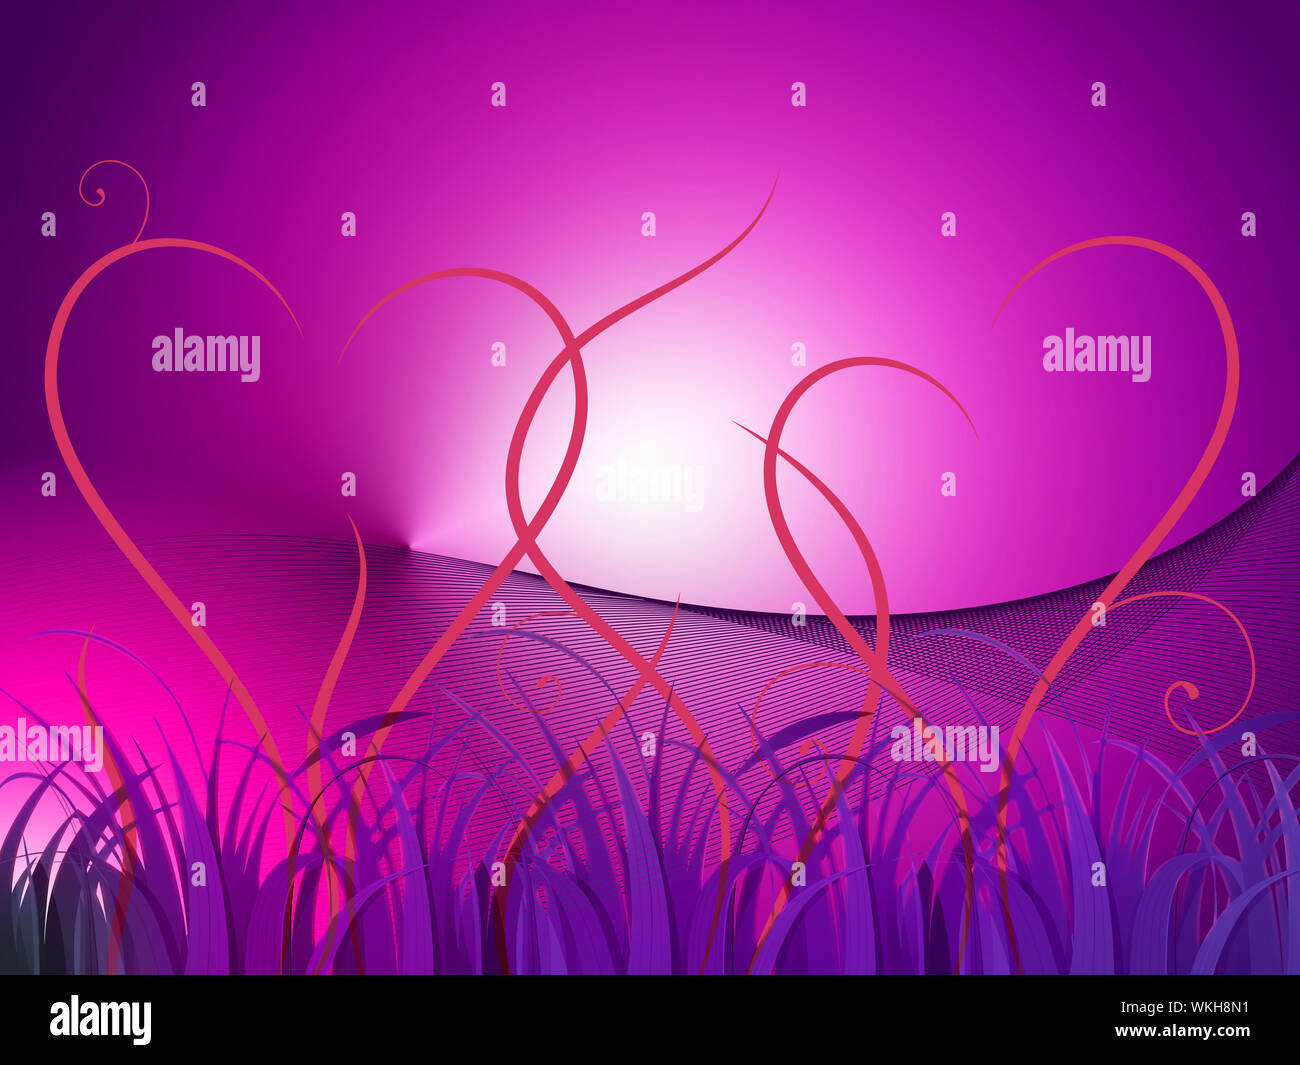 Grass Heart Background Showing Romantic Landscape Or Wallpaper Stock Photo  - Alamy